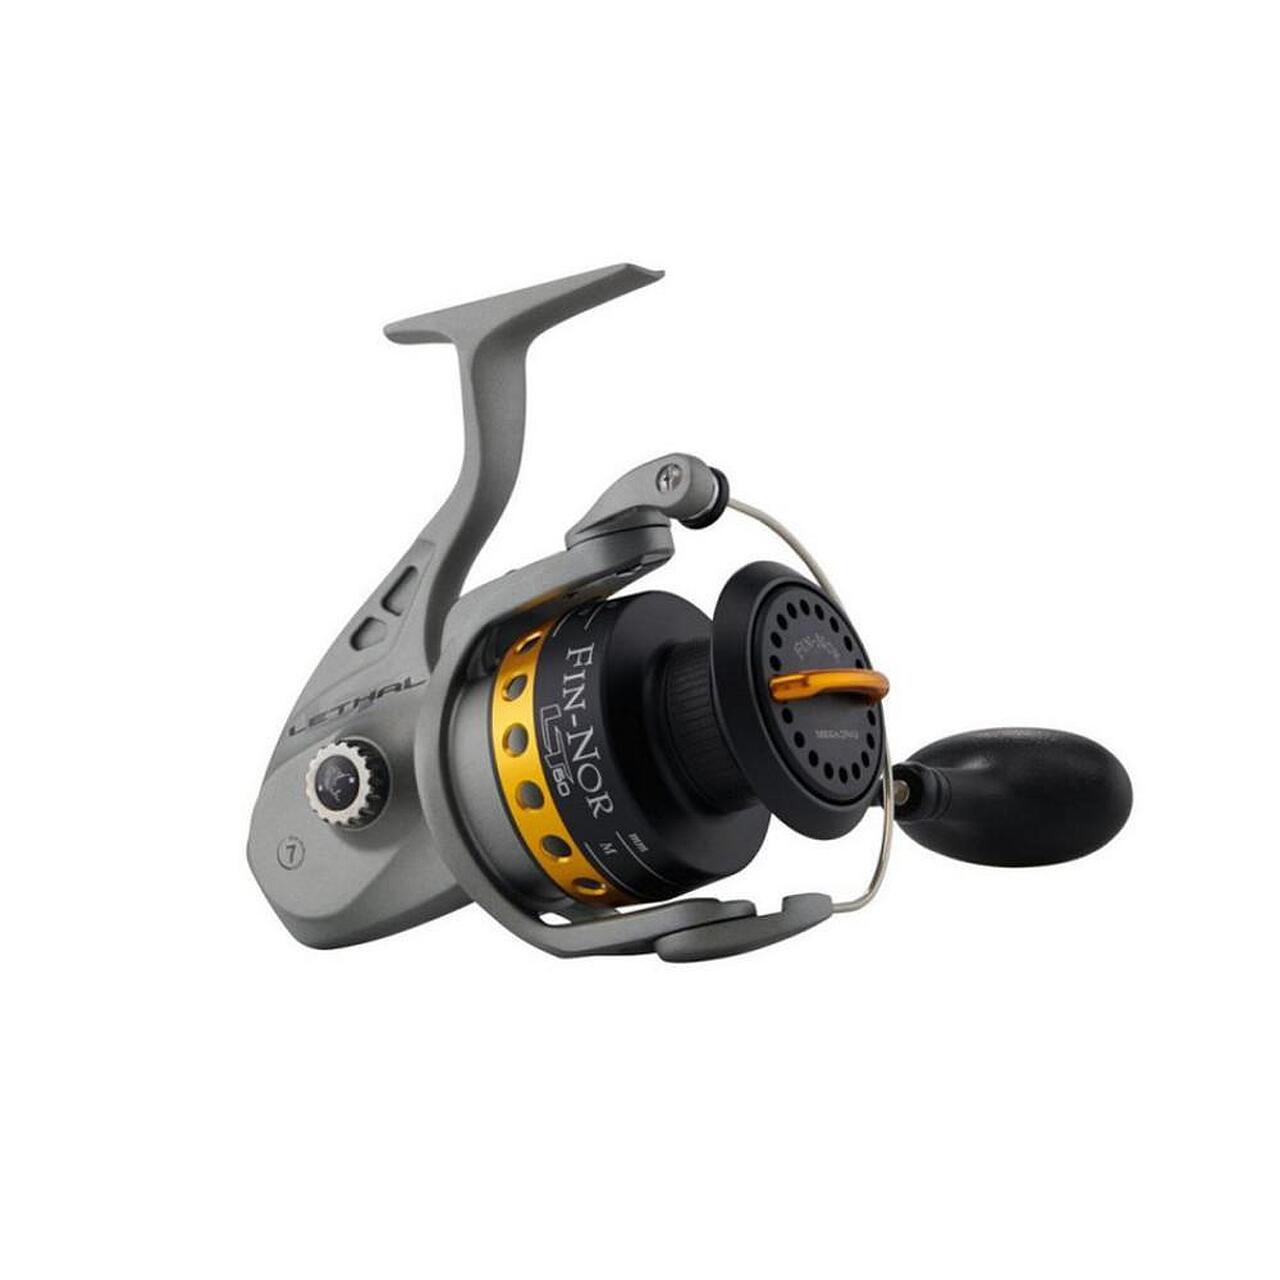 https://cdncloudcart.com/14703/products/images/22736/spinning-reel-fin-nor-lethal-image_6224c476d0940_1280x1280.jpeg?1646576784